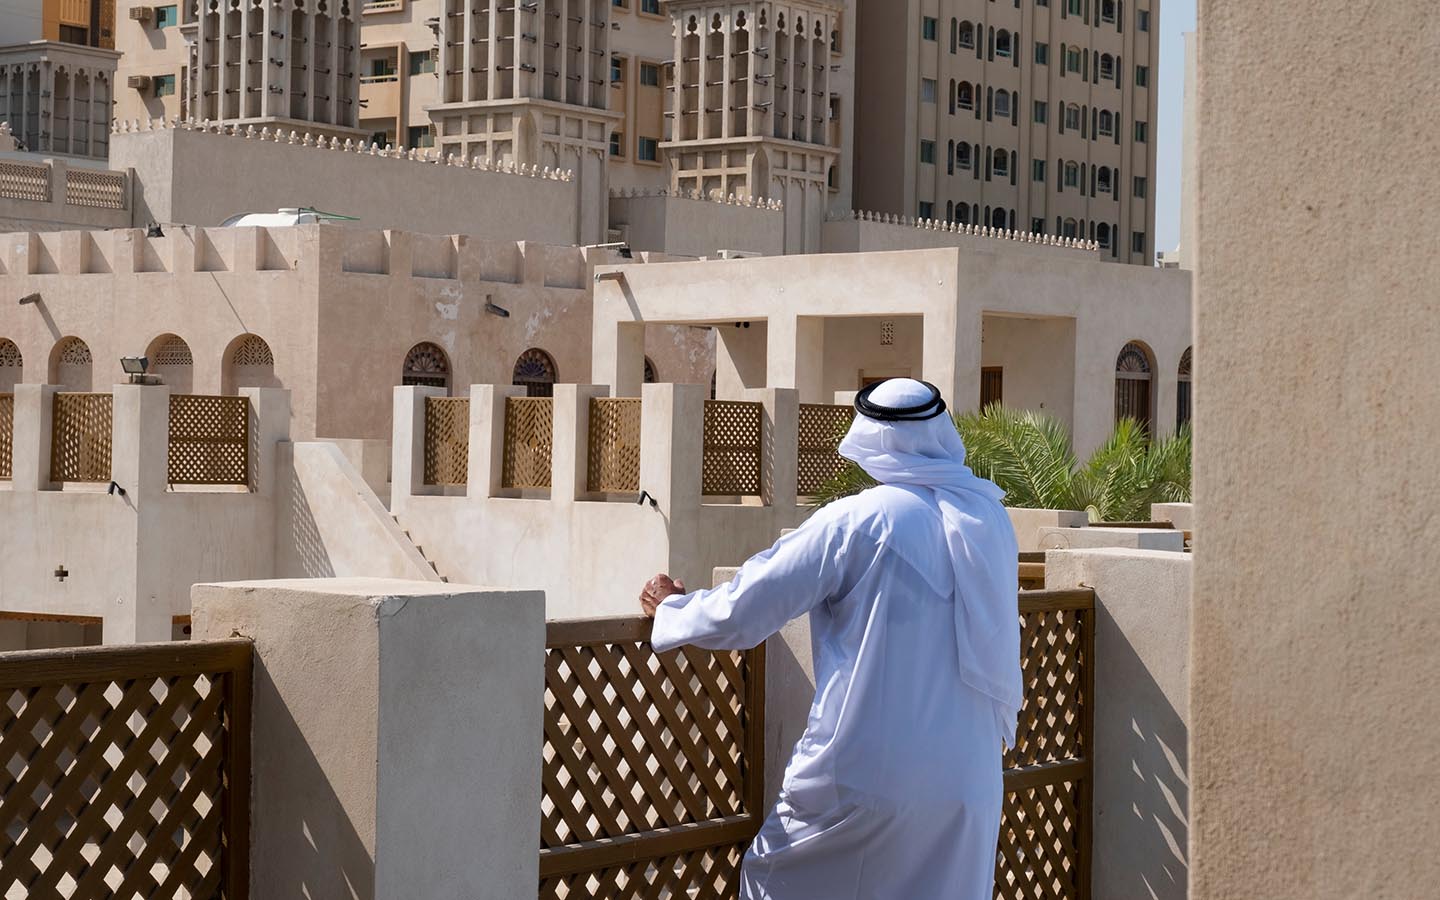 Muwaileh is a popular area for rental apartments in Sharjah